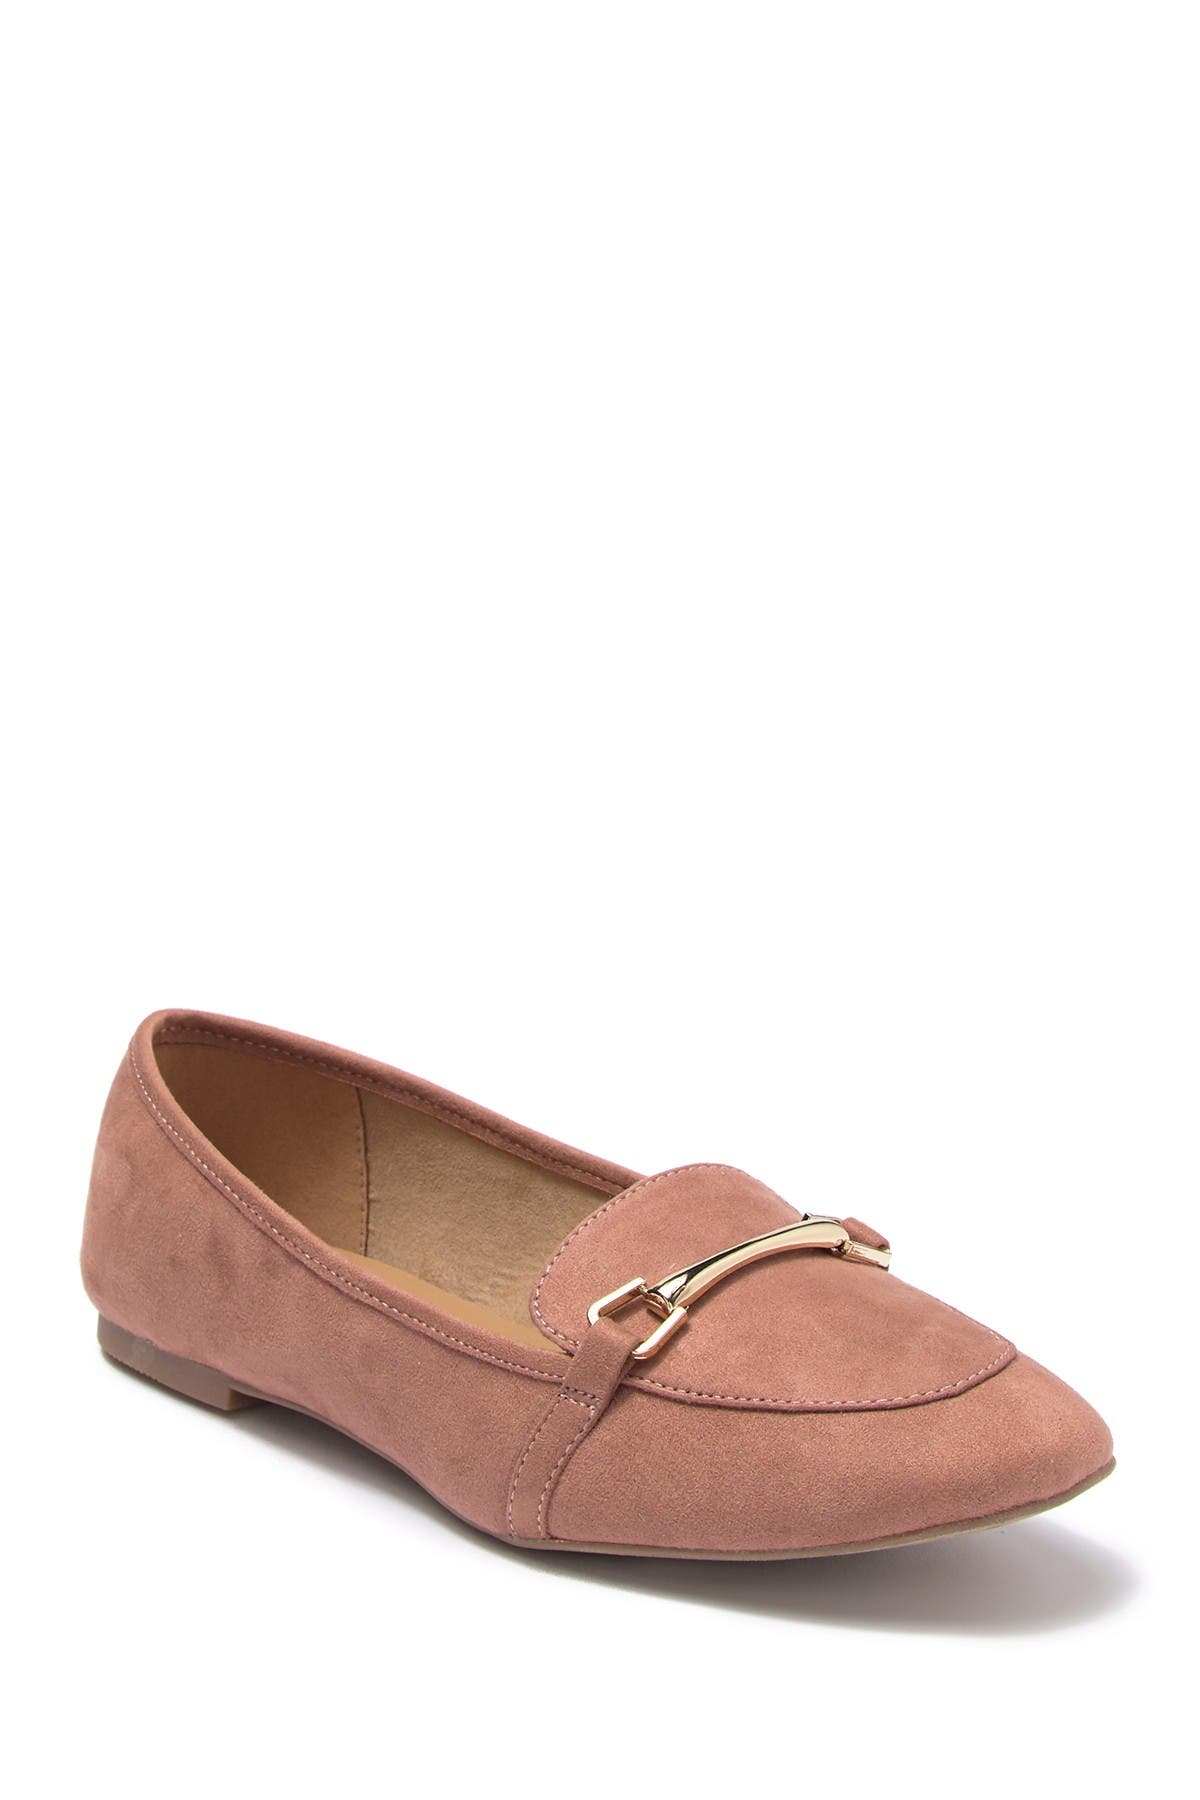 call it spring women's loafers